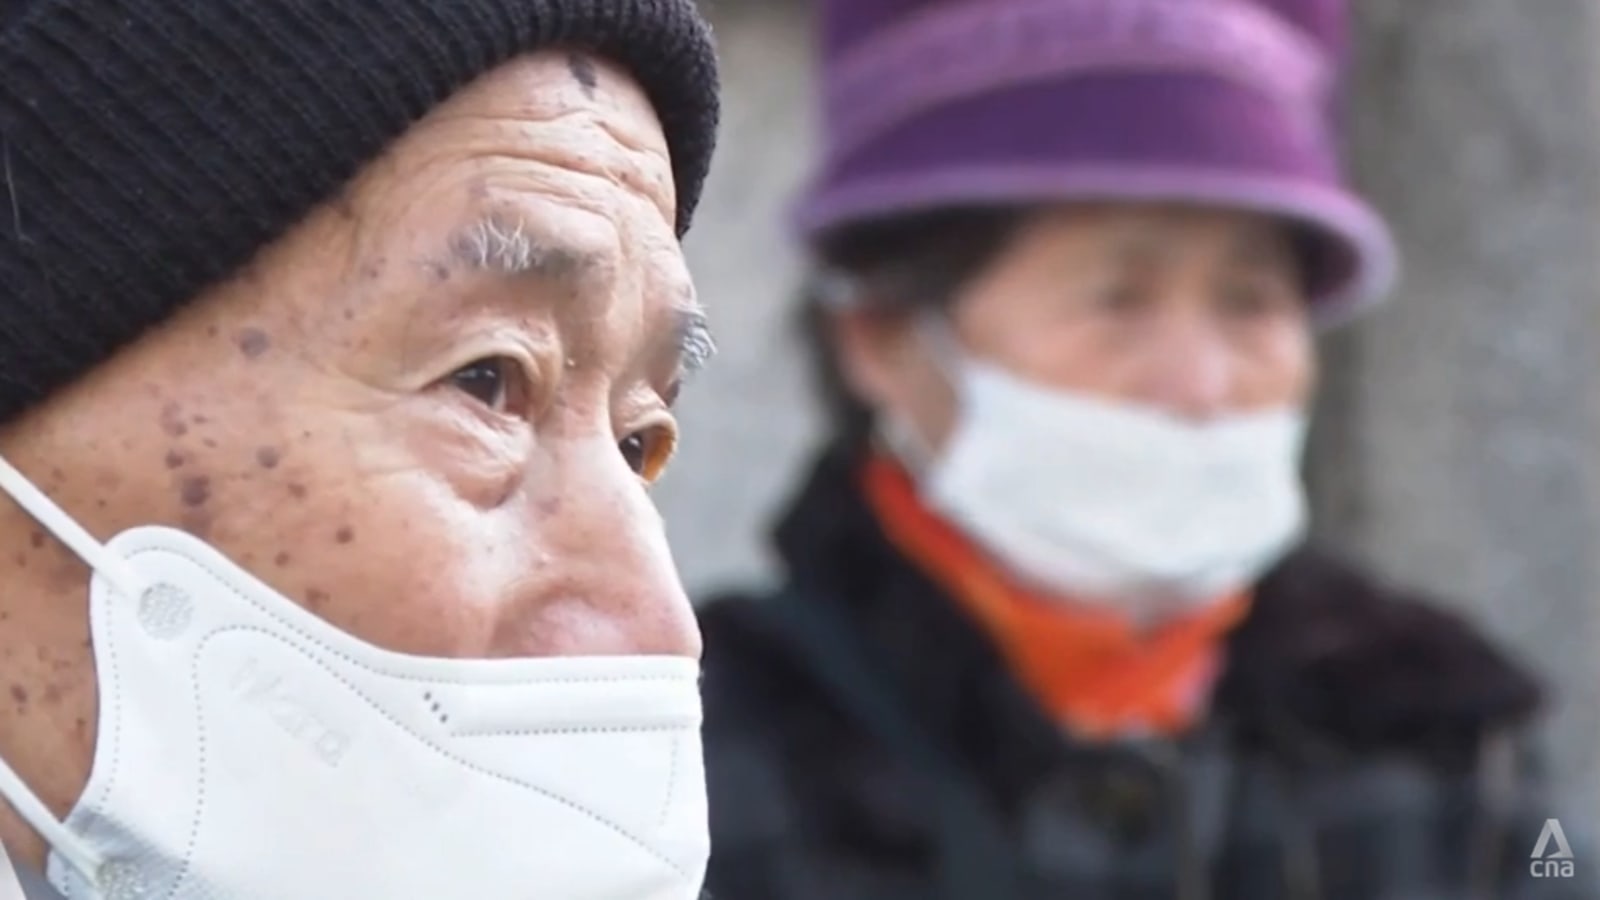 Back to work: Why South Korea’s seniors are rejoining the workforce